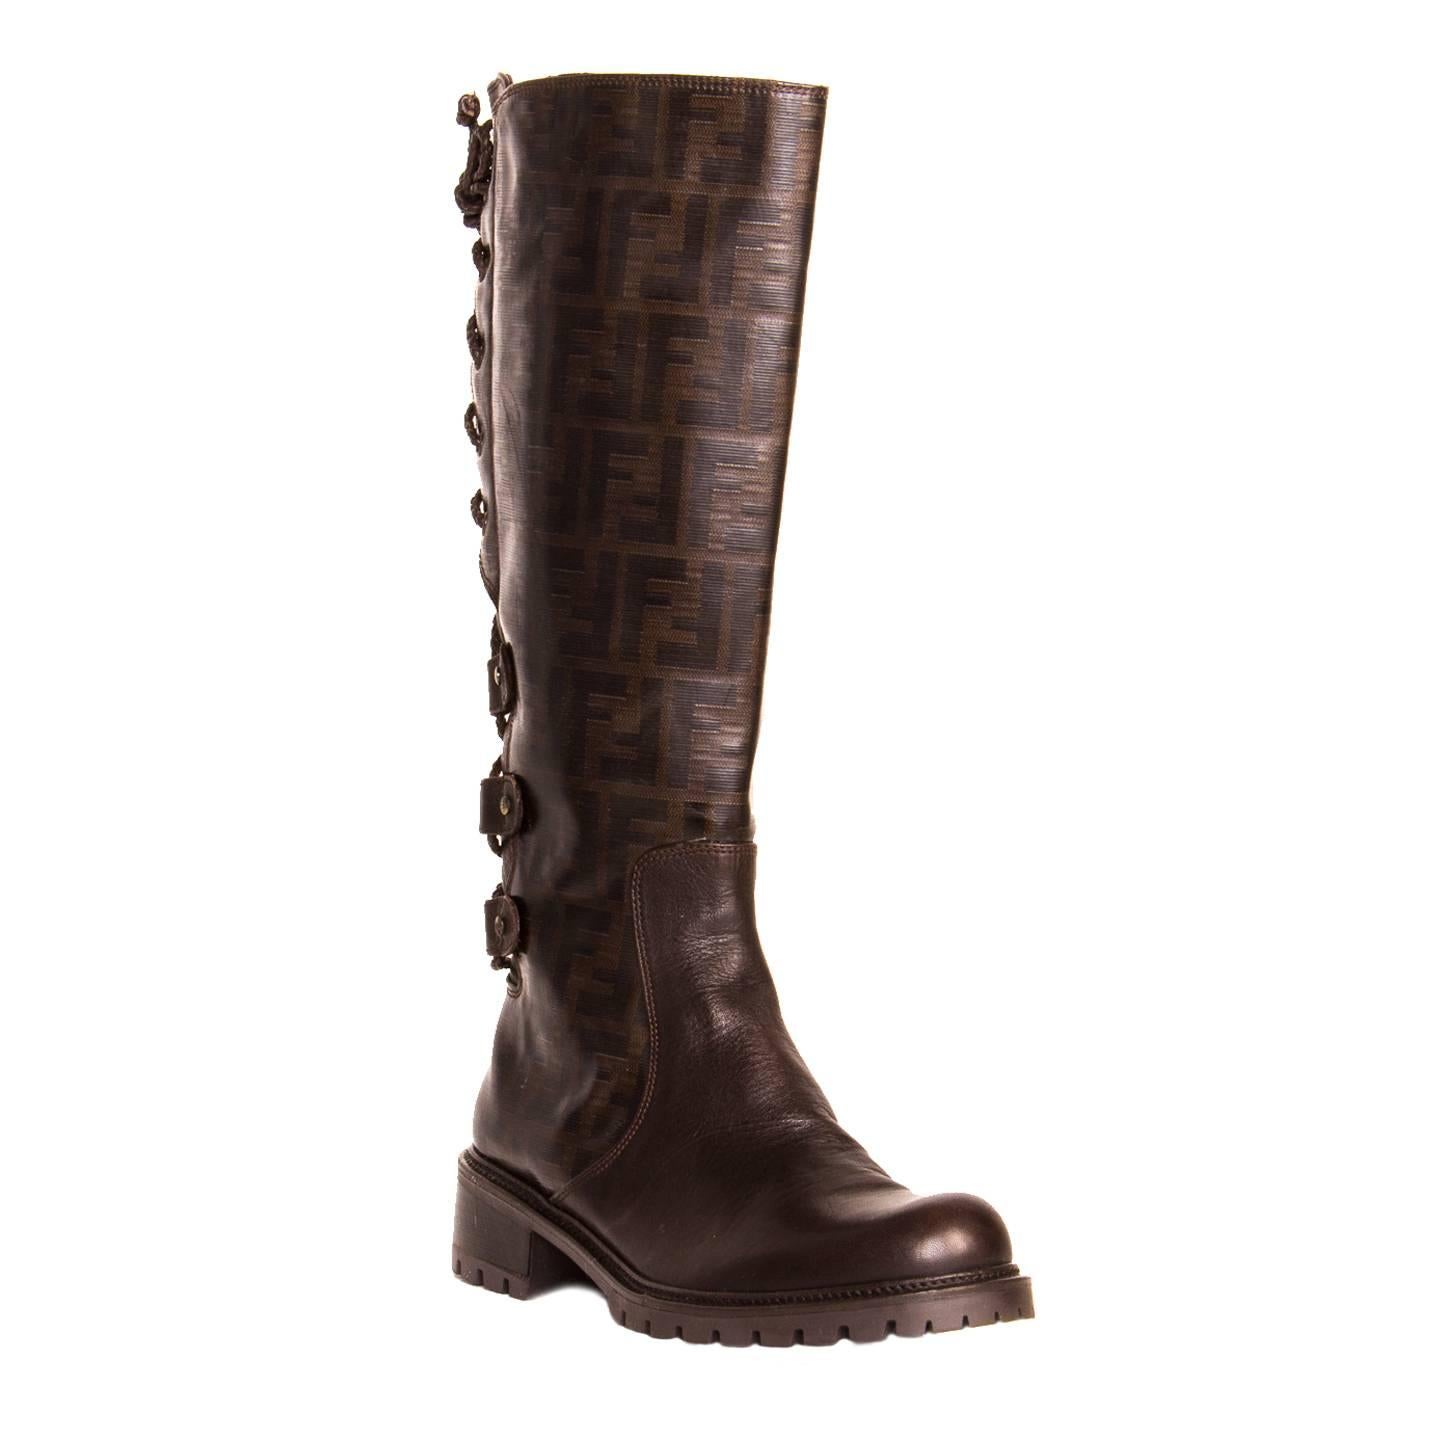 Dark brown knee high boots with Fendi logo fully printed calf and plain leather front. The back of the calfs are embellished by a leather braided lace up detail, while a bronze metal zipper is in the instep. The front is round and the rubber sole is